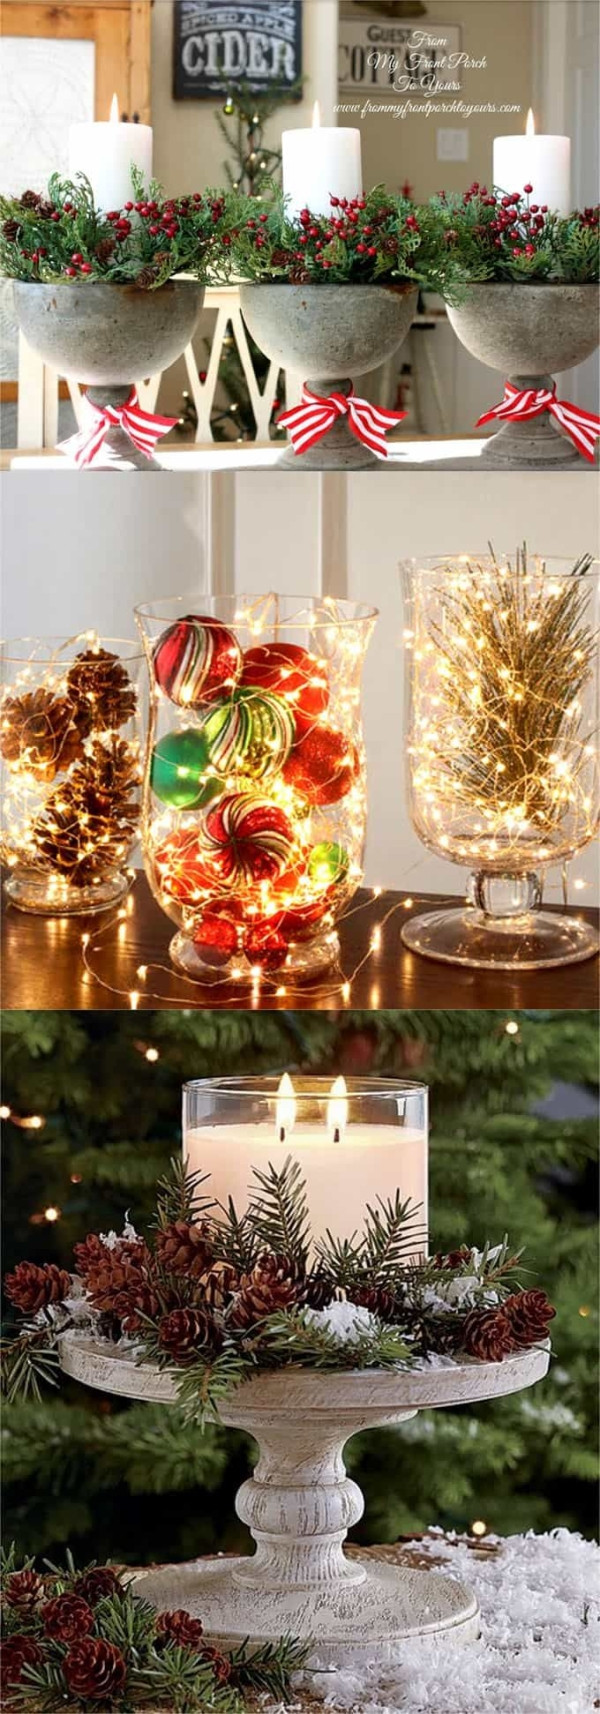 Diy Thanksgiving Table Decorations
 27 gorgeous & easy DIY Thanksgiving and Christmas table